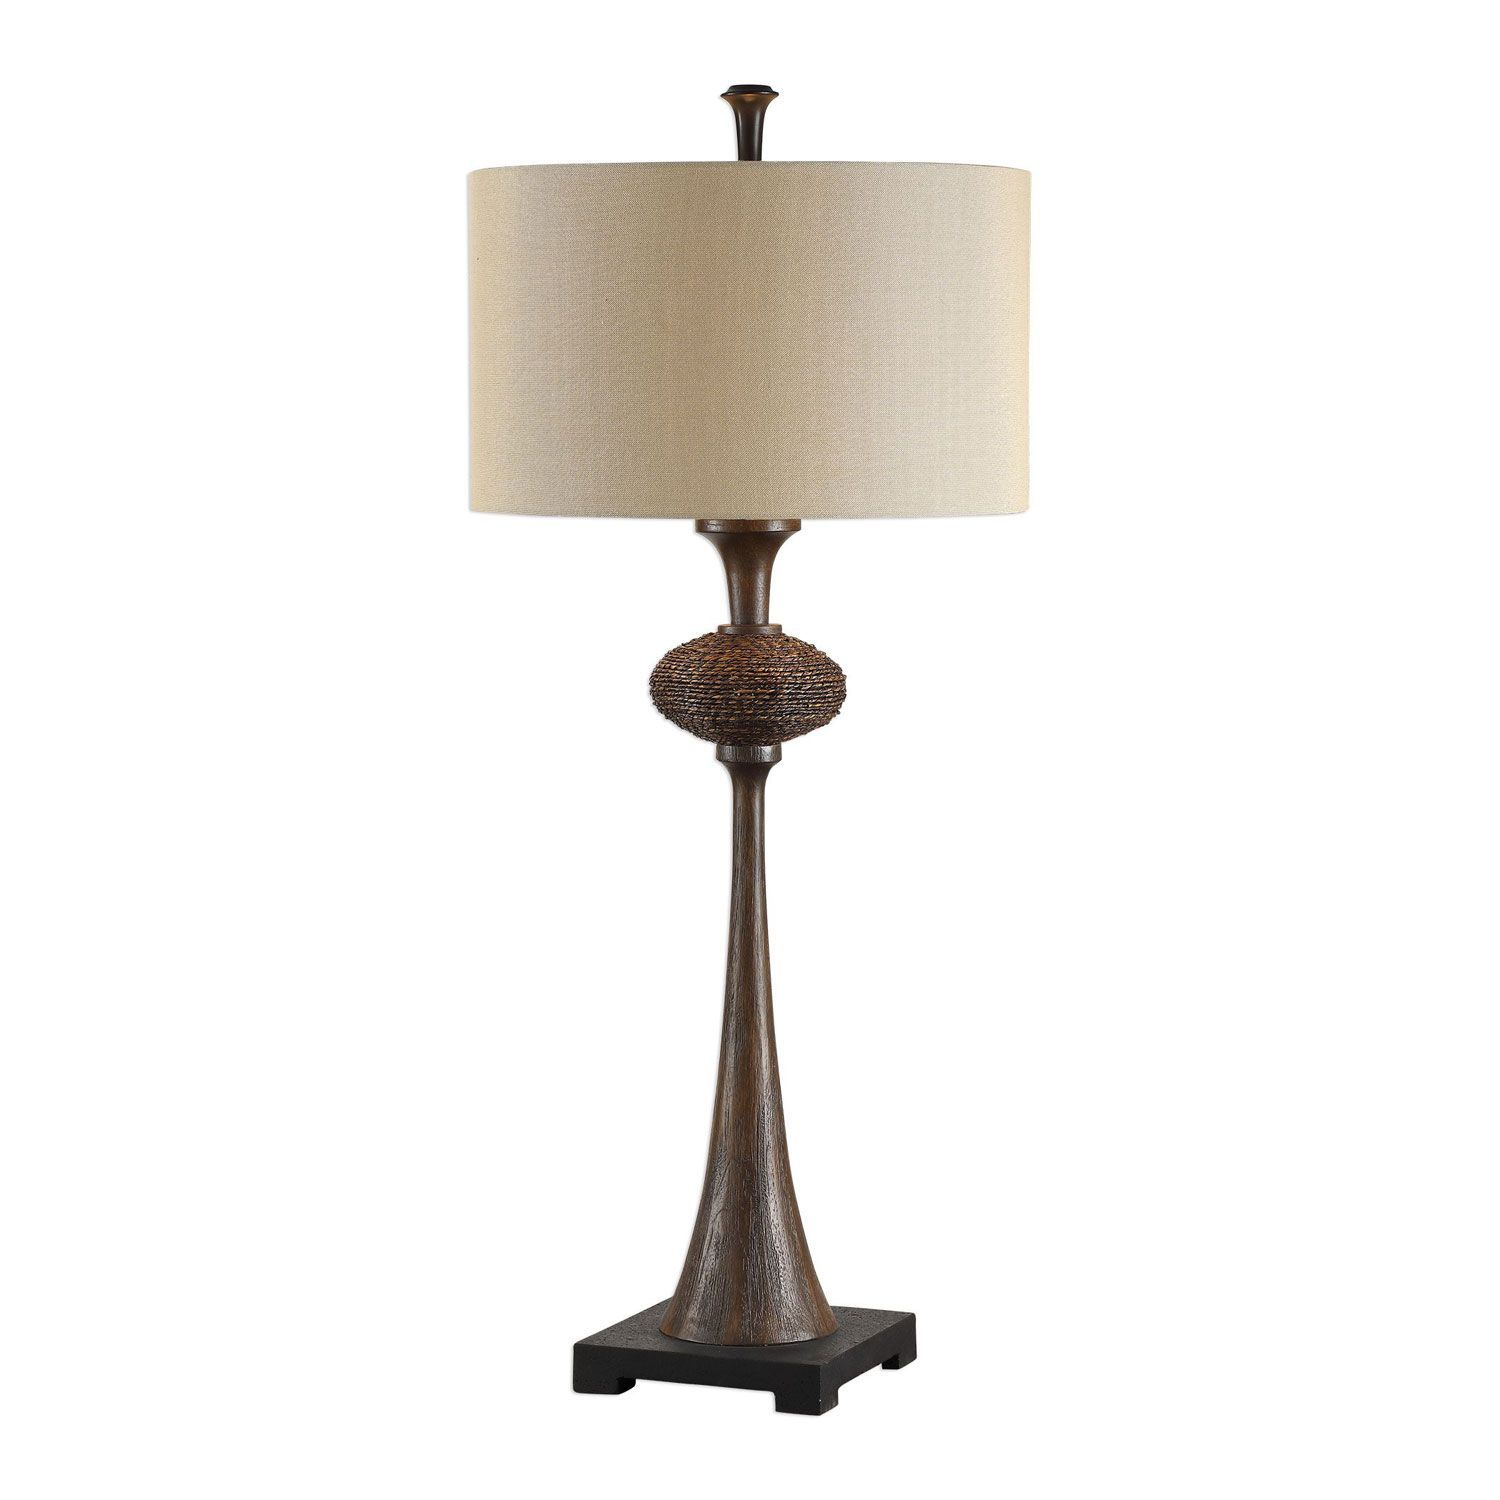 Collbran Woven Rattan Lamp Uttermost Accent Lamp Table Lamps intended for proportions 1500 X 1500